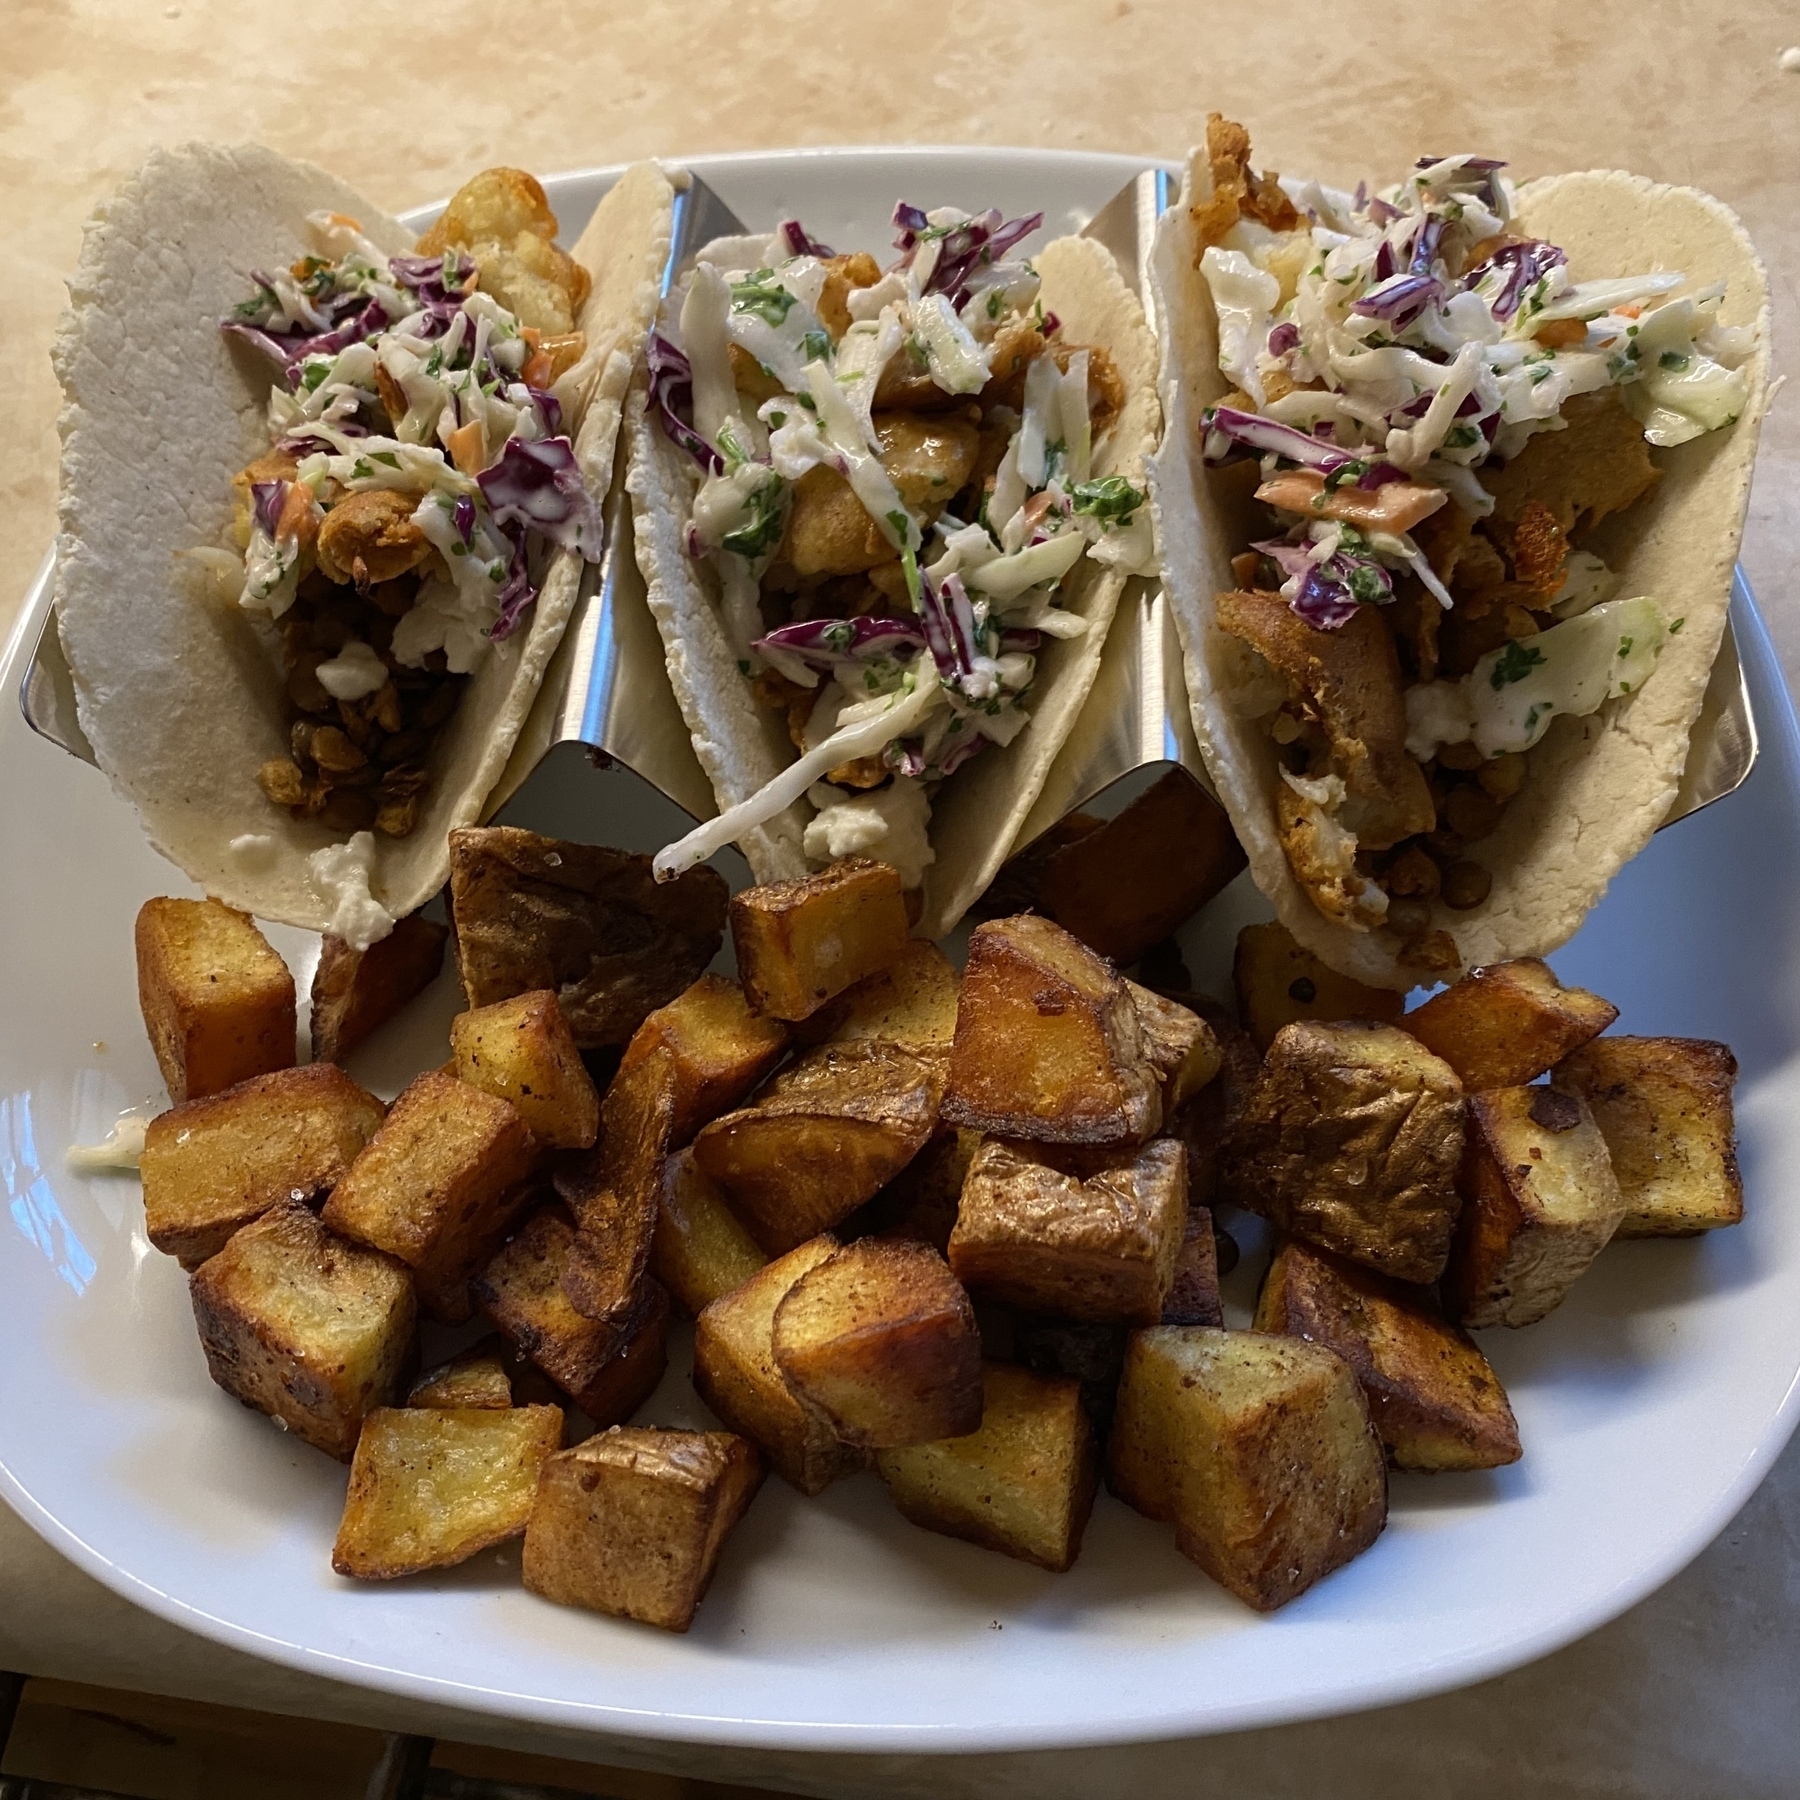 Tacos and fried potatoes on a plate.